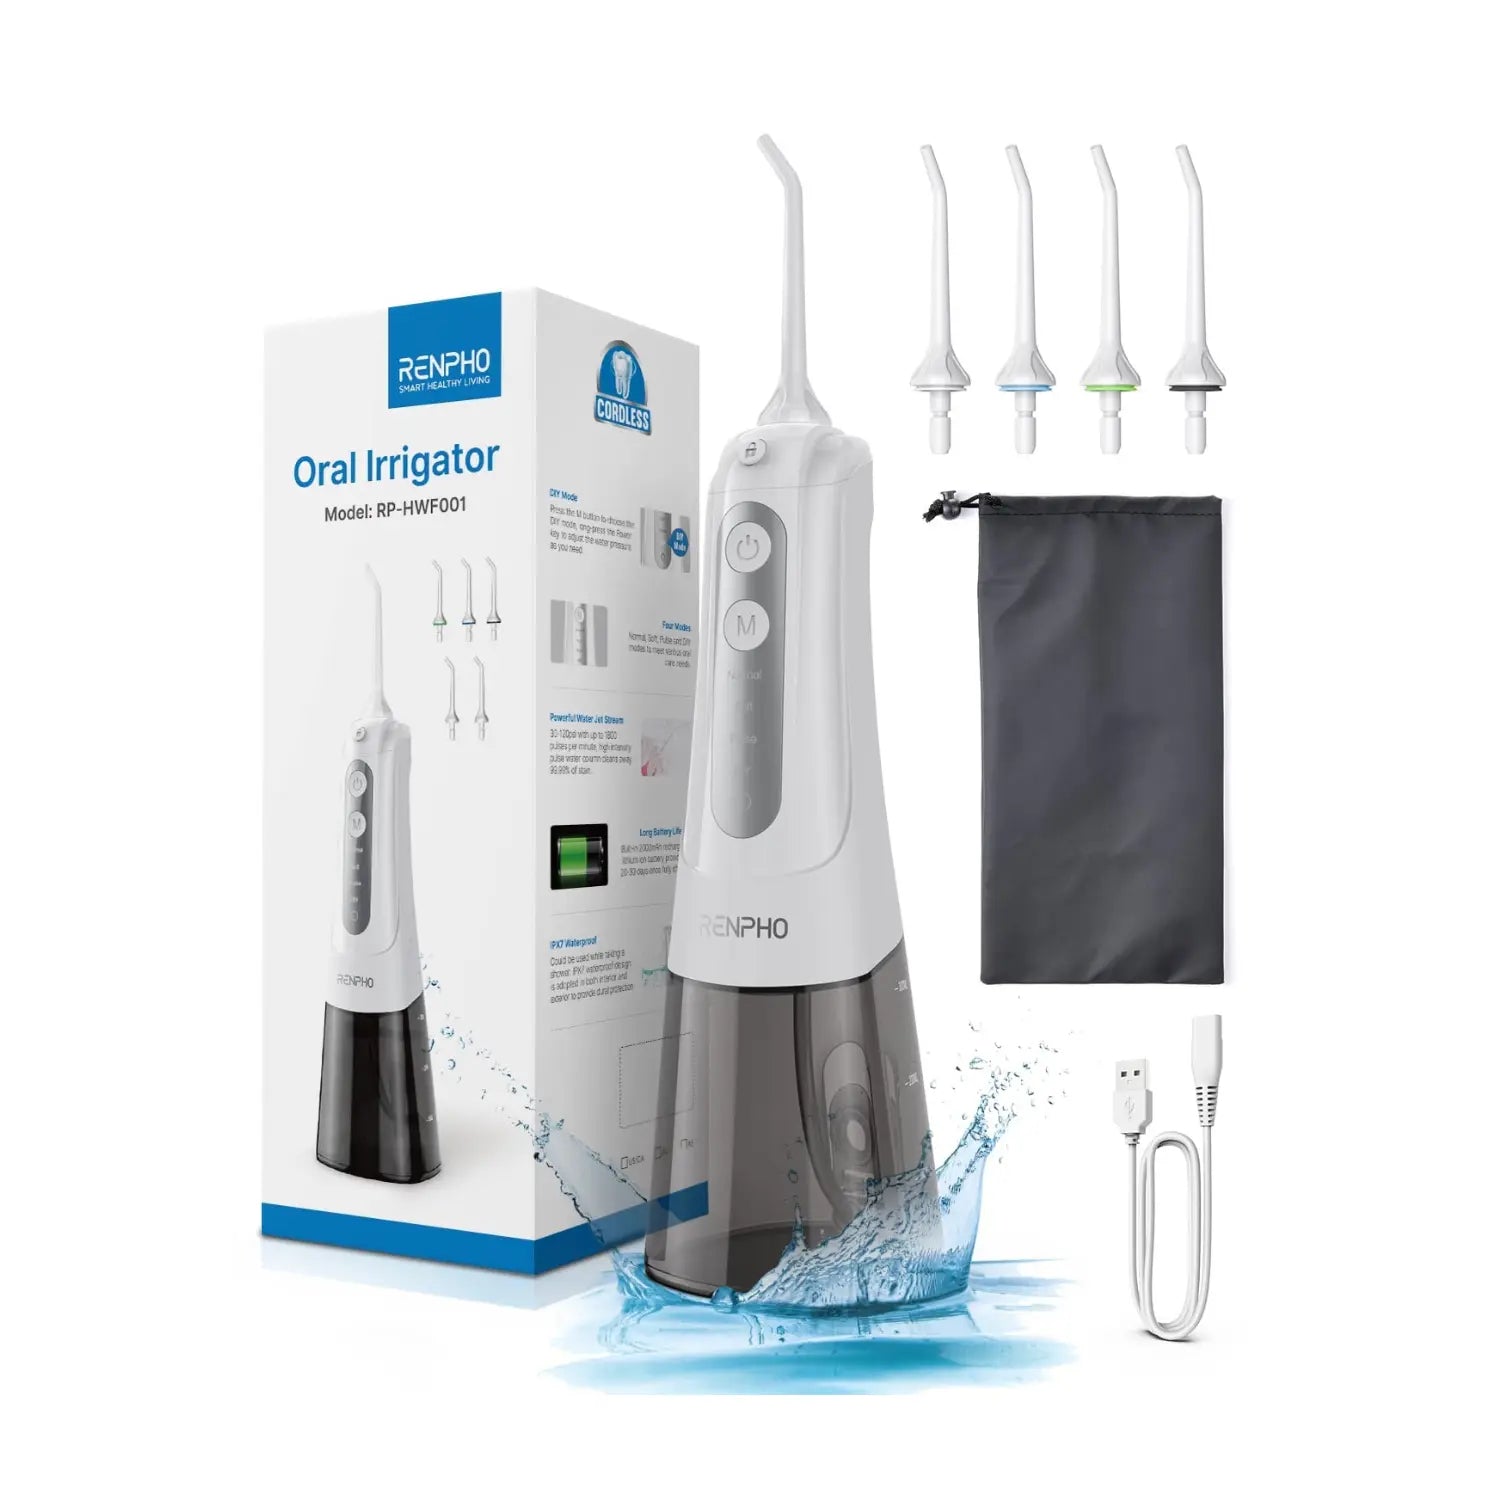 Image of a Renpho EU Cordless Water Flosser set. It includes a sleek white and gray Professional Hydropulse Jet device, four different 360° Rotating Tips, a gray storage pouch, and a USB charging cable. The packaging showcases product features with illustrations. The irrigator is shown with splashes of water, emphasizing its use as an innovative Dental Floss Alternative.